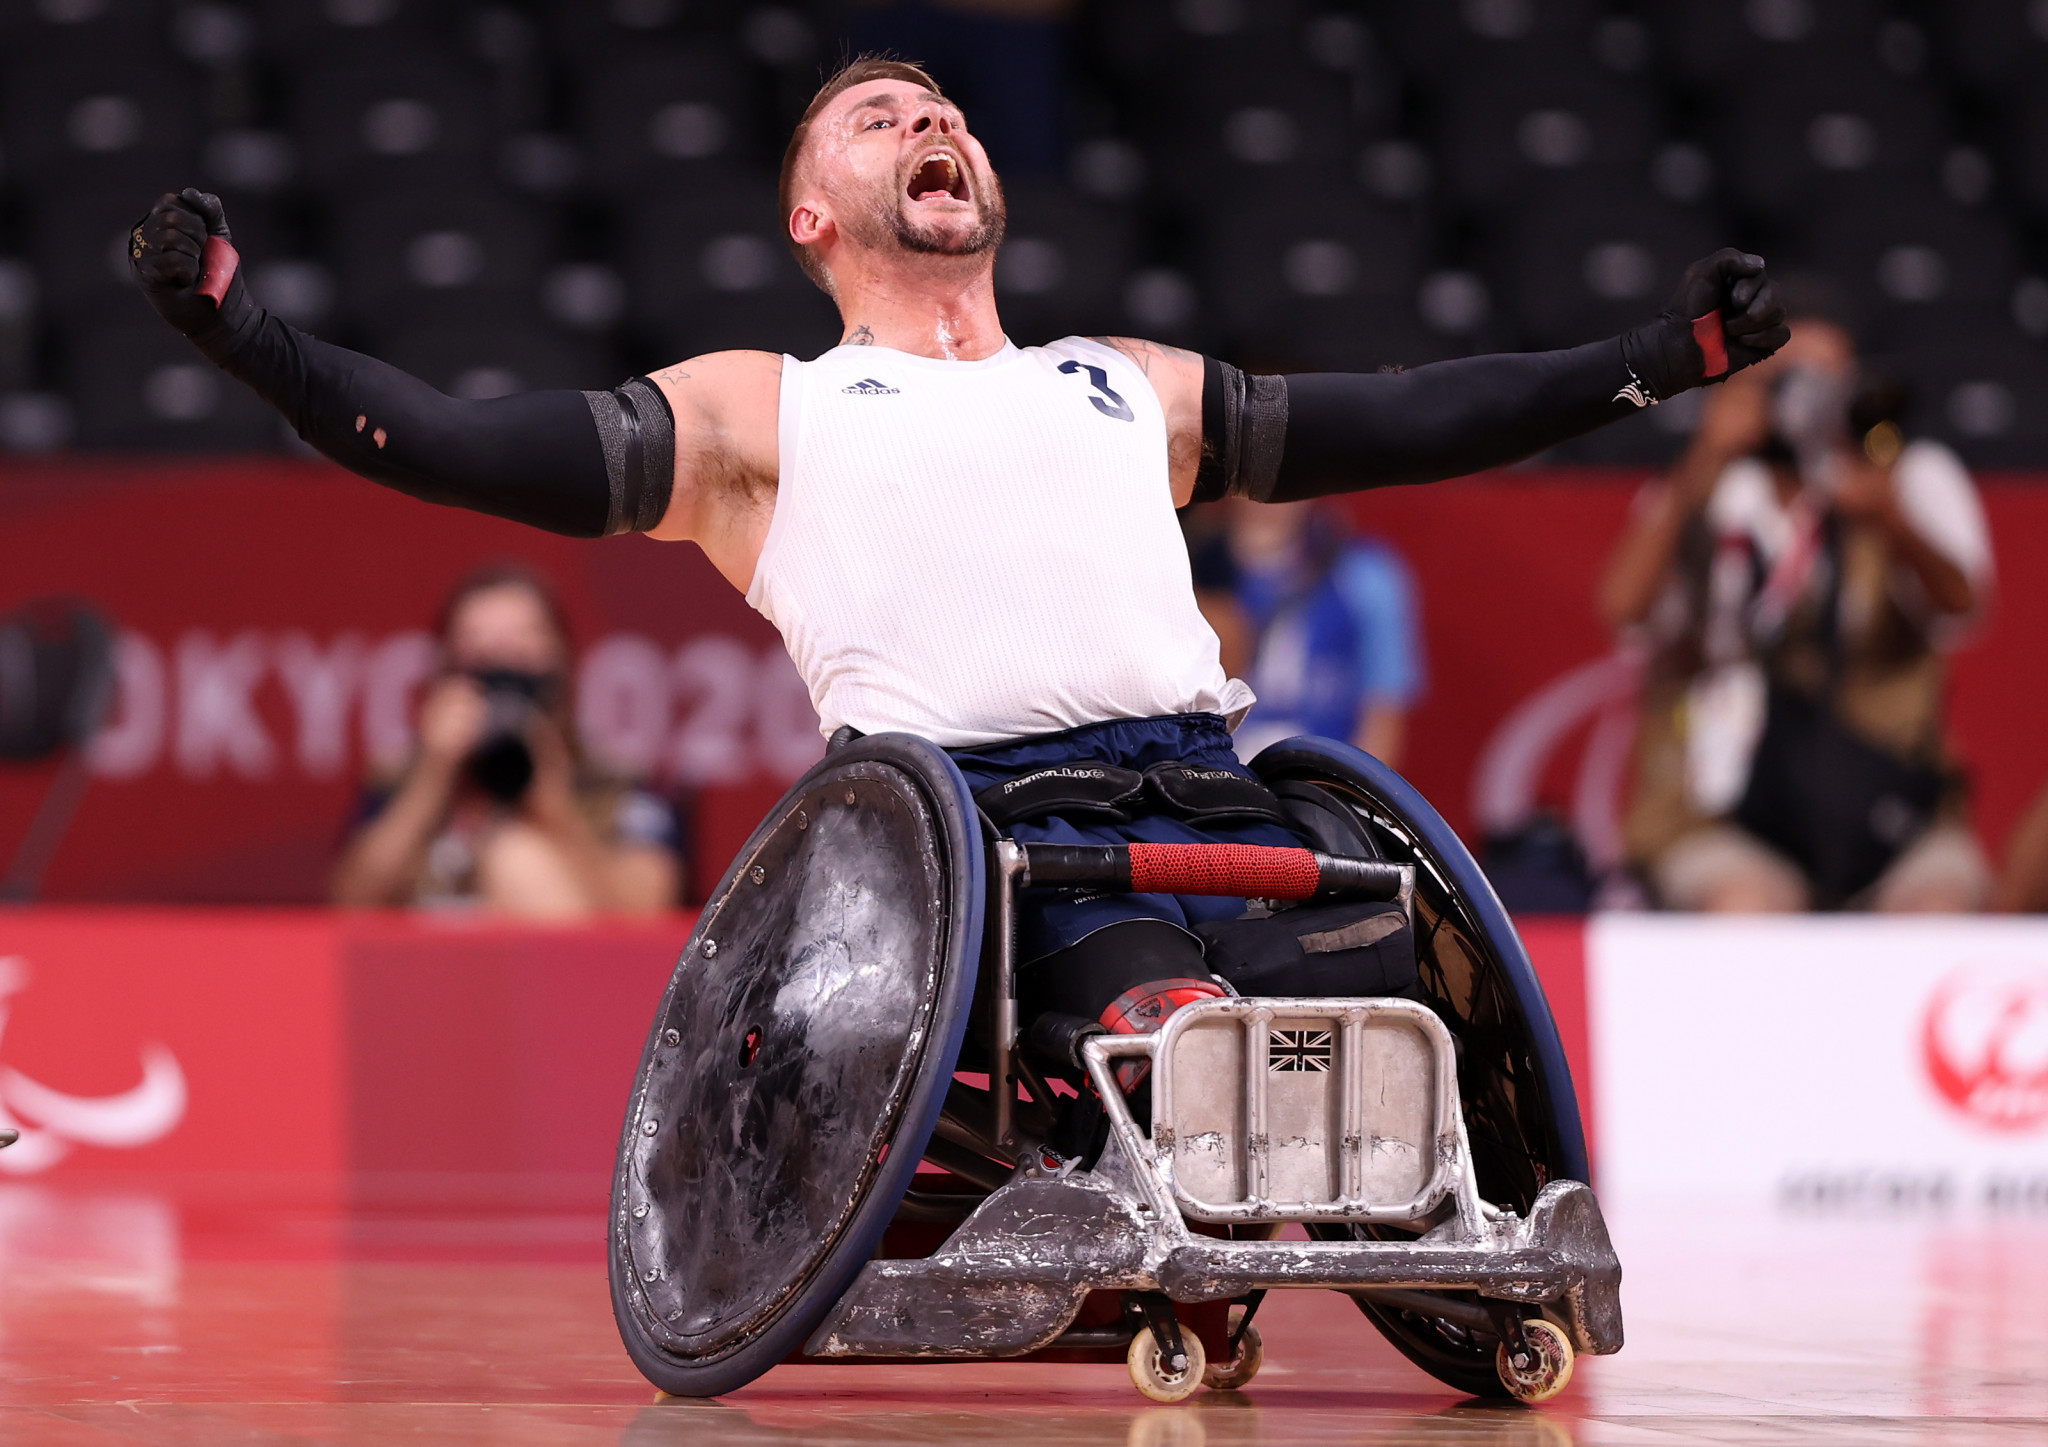 Britain won a historic first ever wheelchair rugby gold, defeating the United States 54-49 in a hotly contested final ©Getty Images